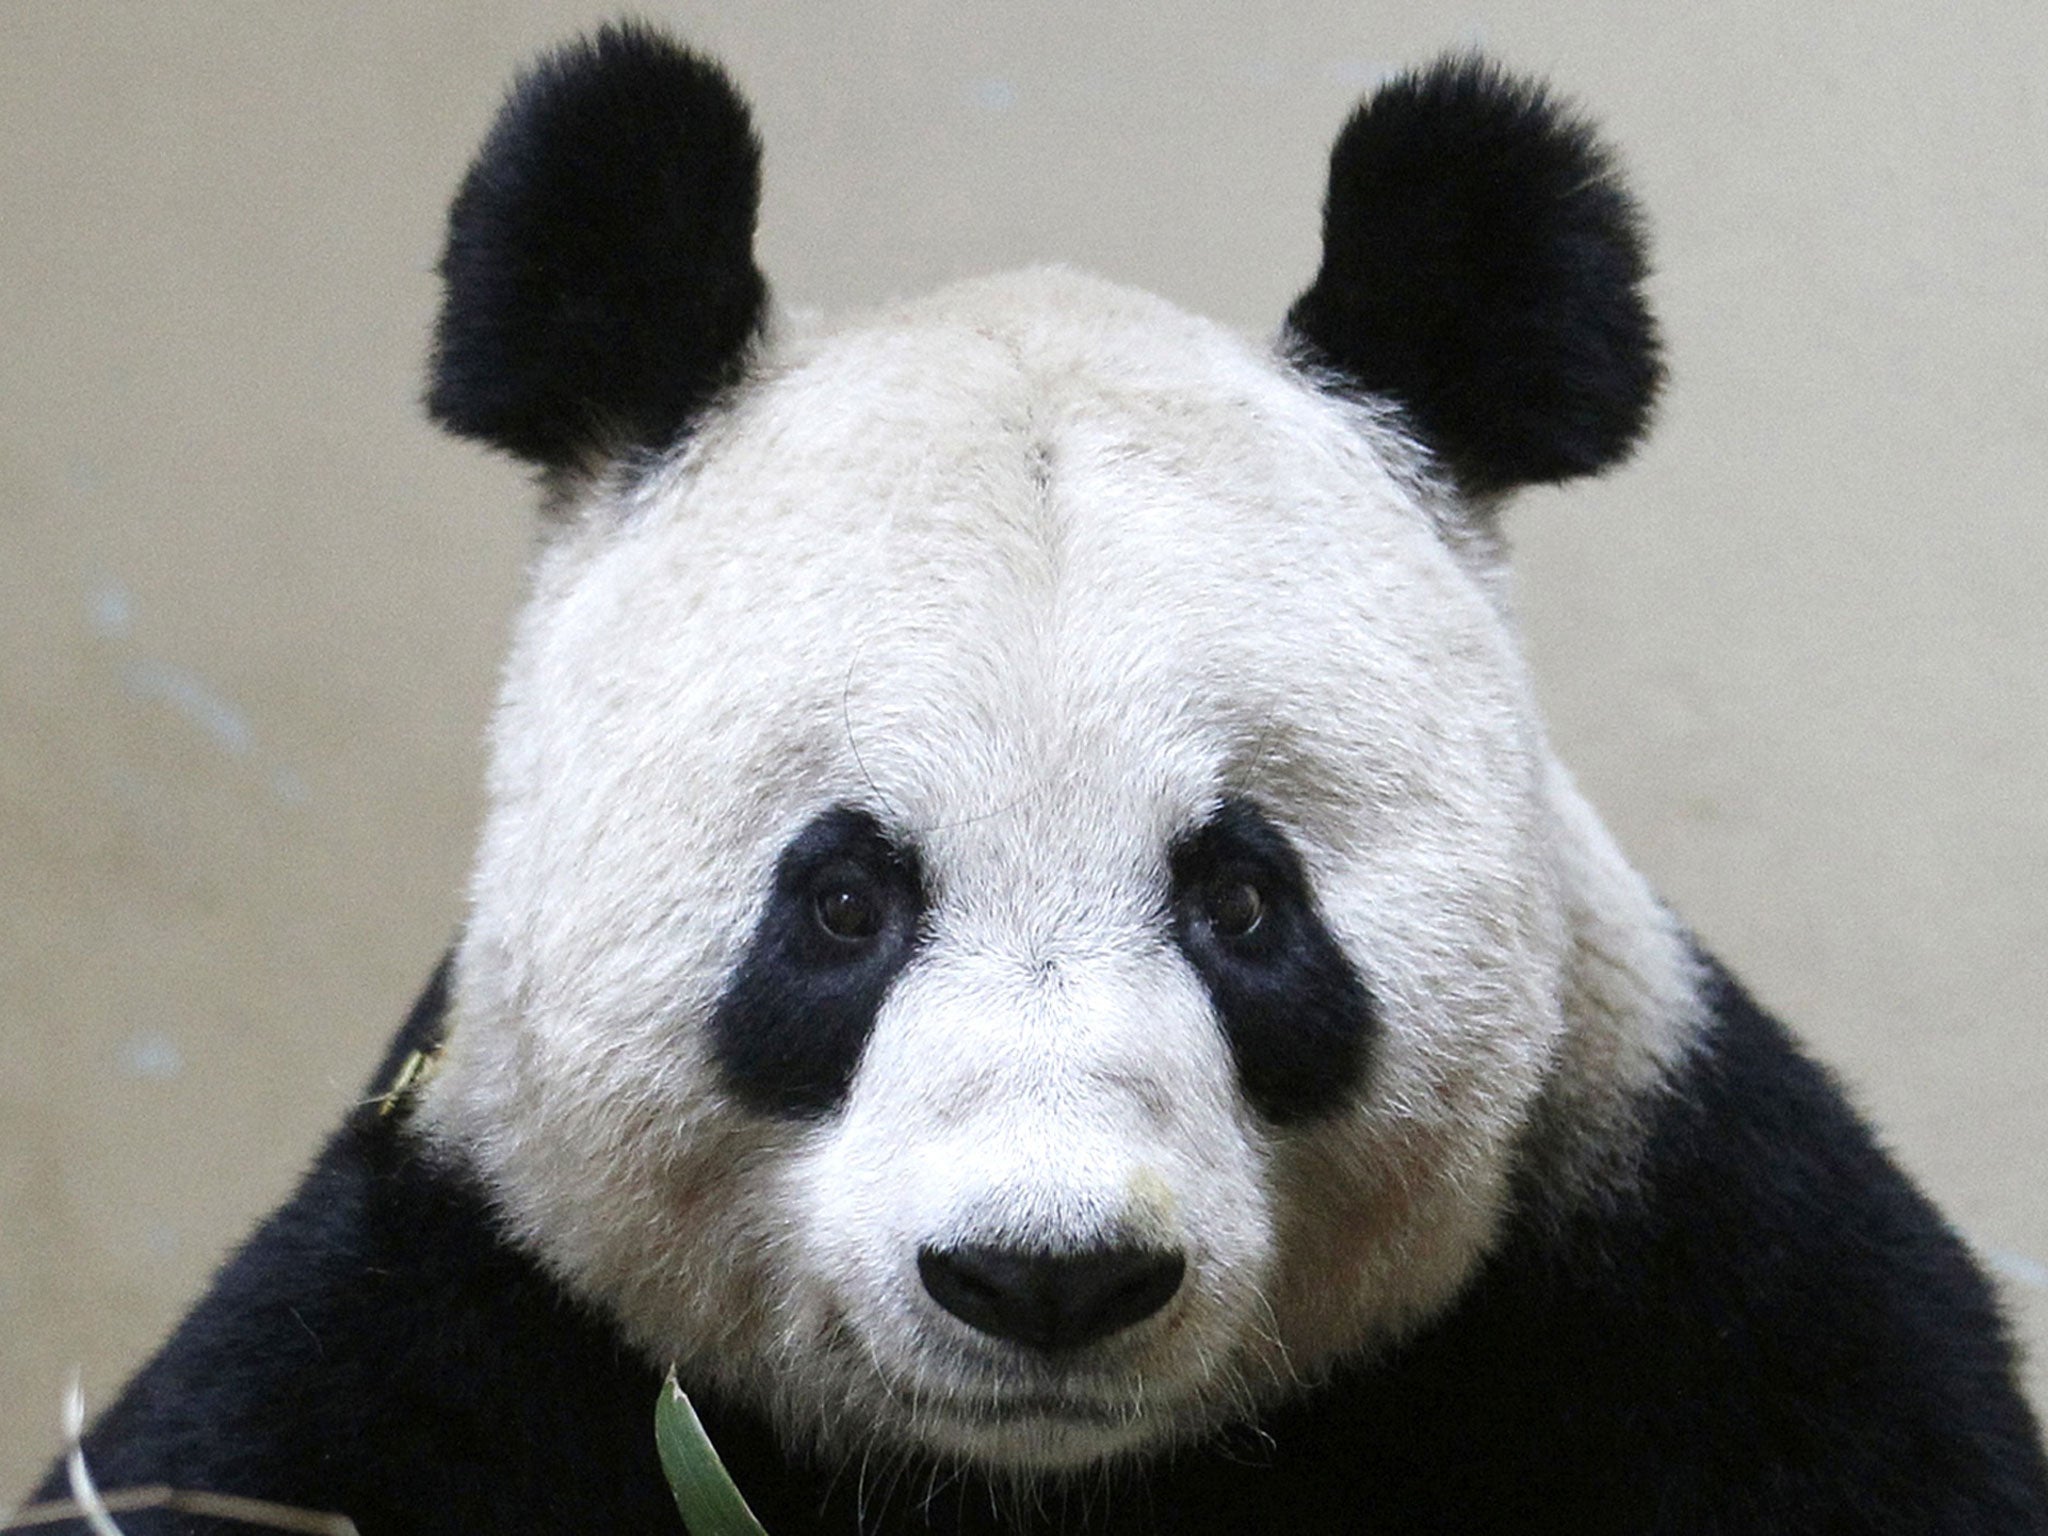 Panda sex exposé: Why does the male struggle to perform his duty in  captivity? | The Independent | The Independent